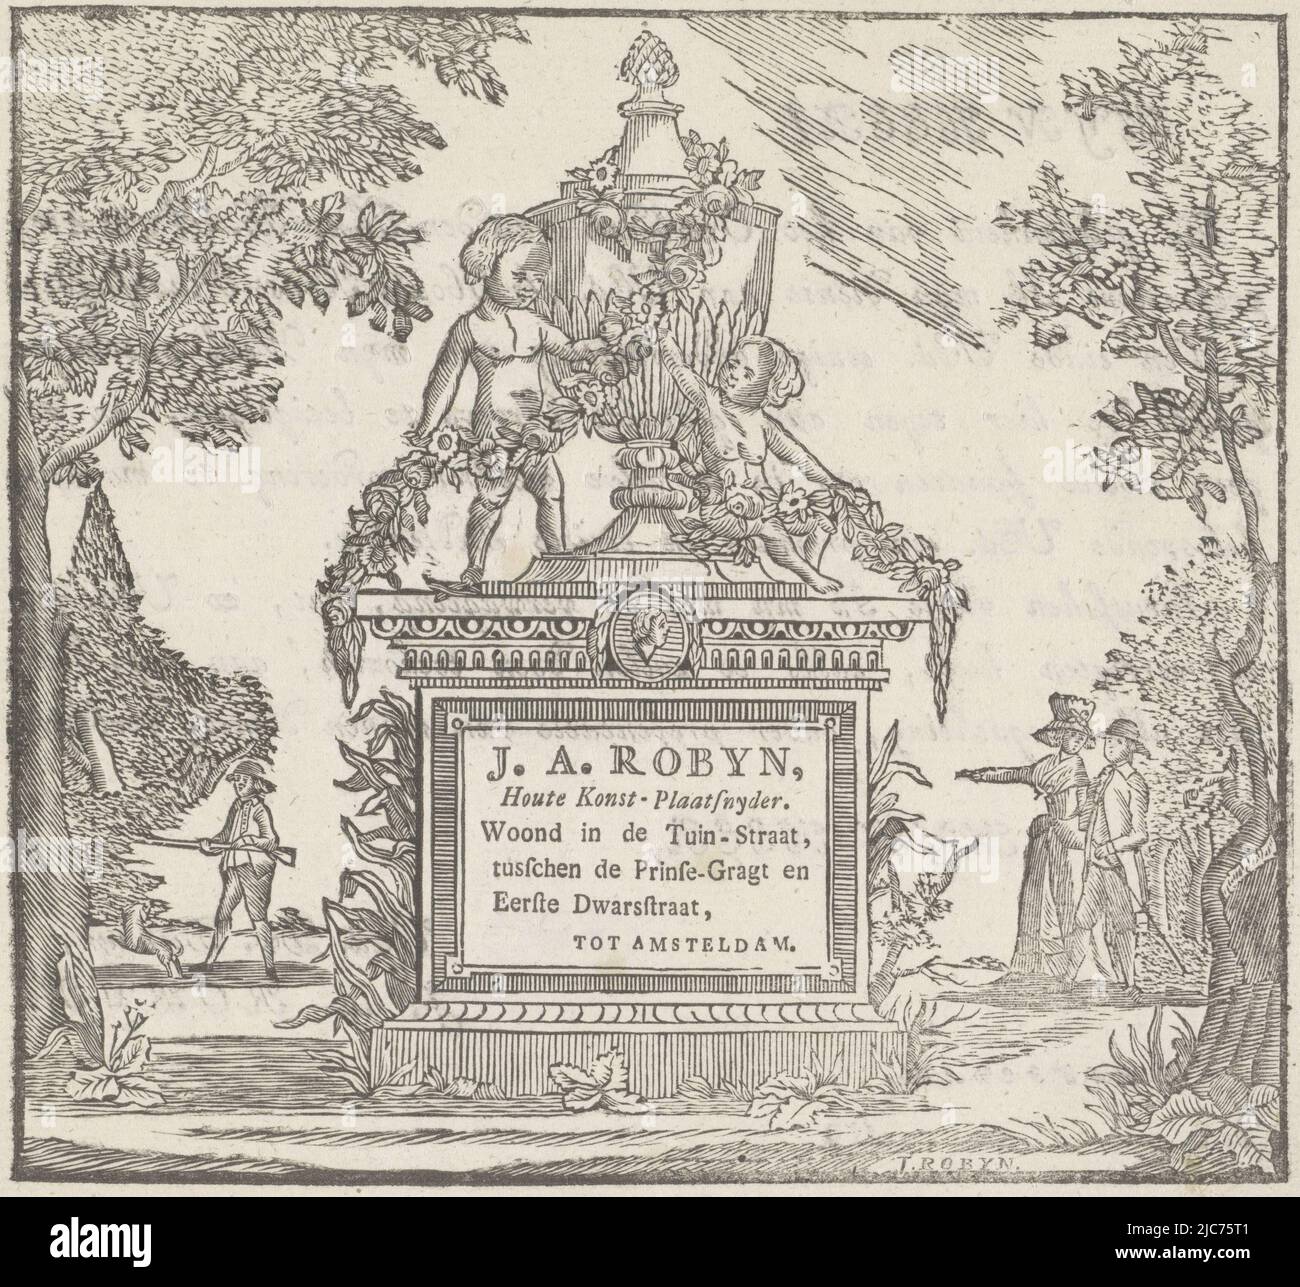 Monument with a large ornamented cup and two putti. On the pedestal six lines of Dutch text. In the background several figures and a dog walk among the trees. Advertisement for printmaker Jacobus Robijn, print maker: Jacobus Robijn, (mentioned on object), Amsterdam, c. 1657 - c. 1747, paper, letterpress printing, h 165 mm × w 209 mm Stock Photo